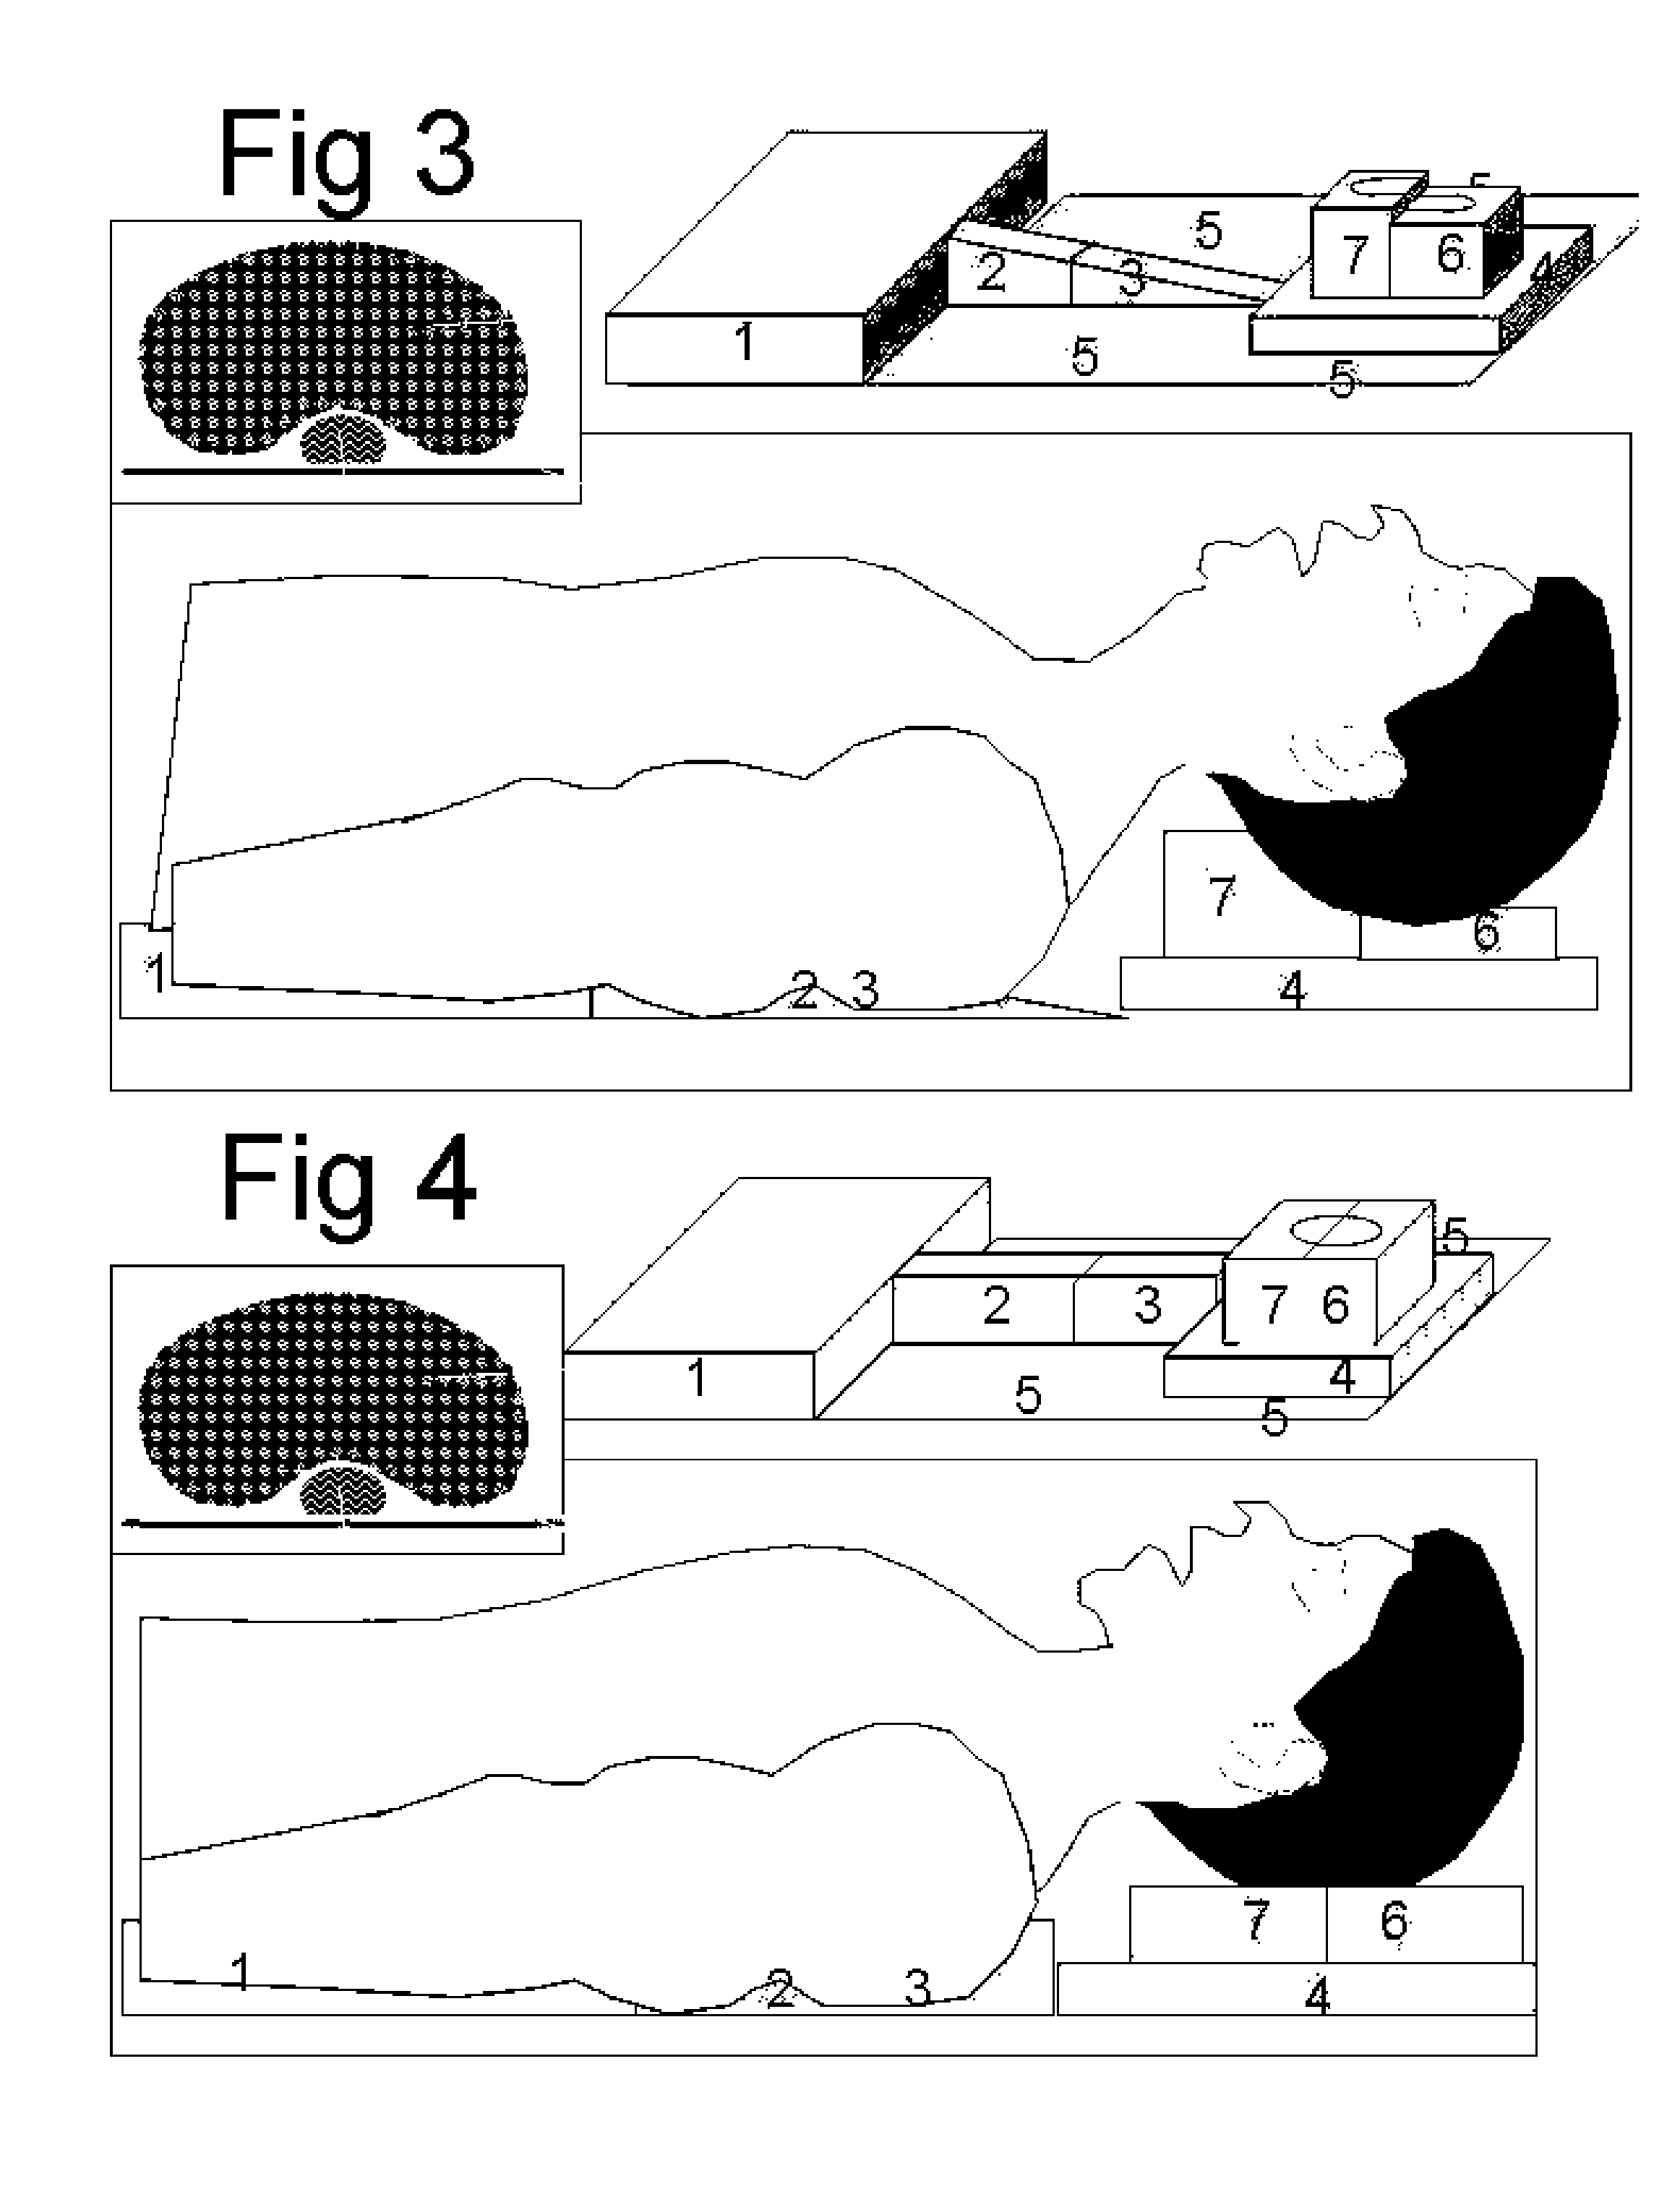 Intubation positioning, breathing facilitator and non-invasive assist ventilation device